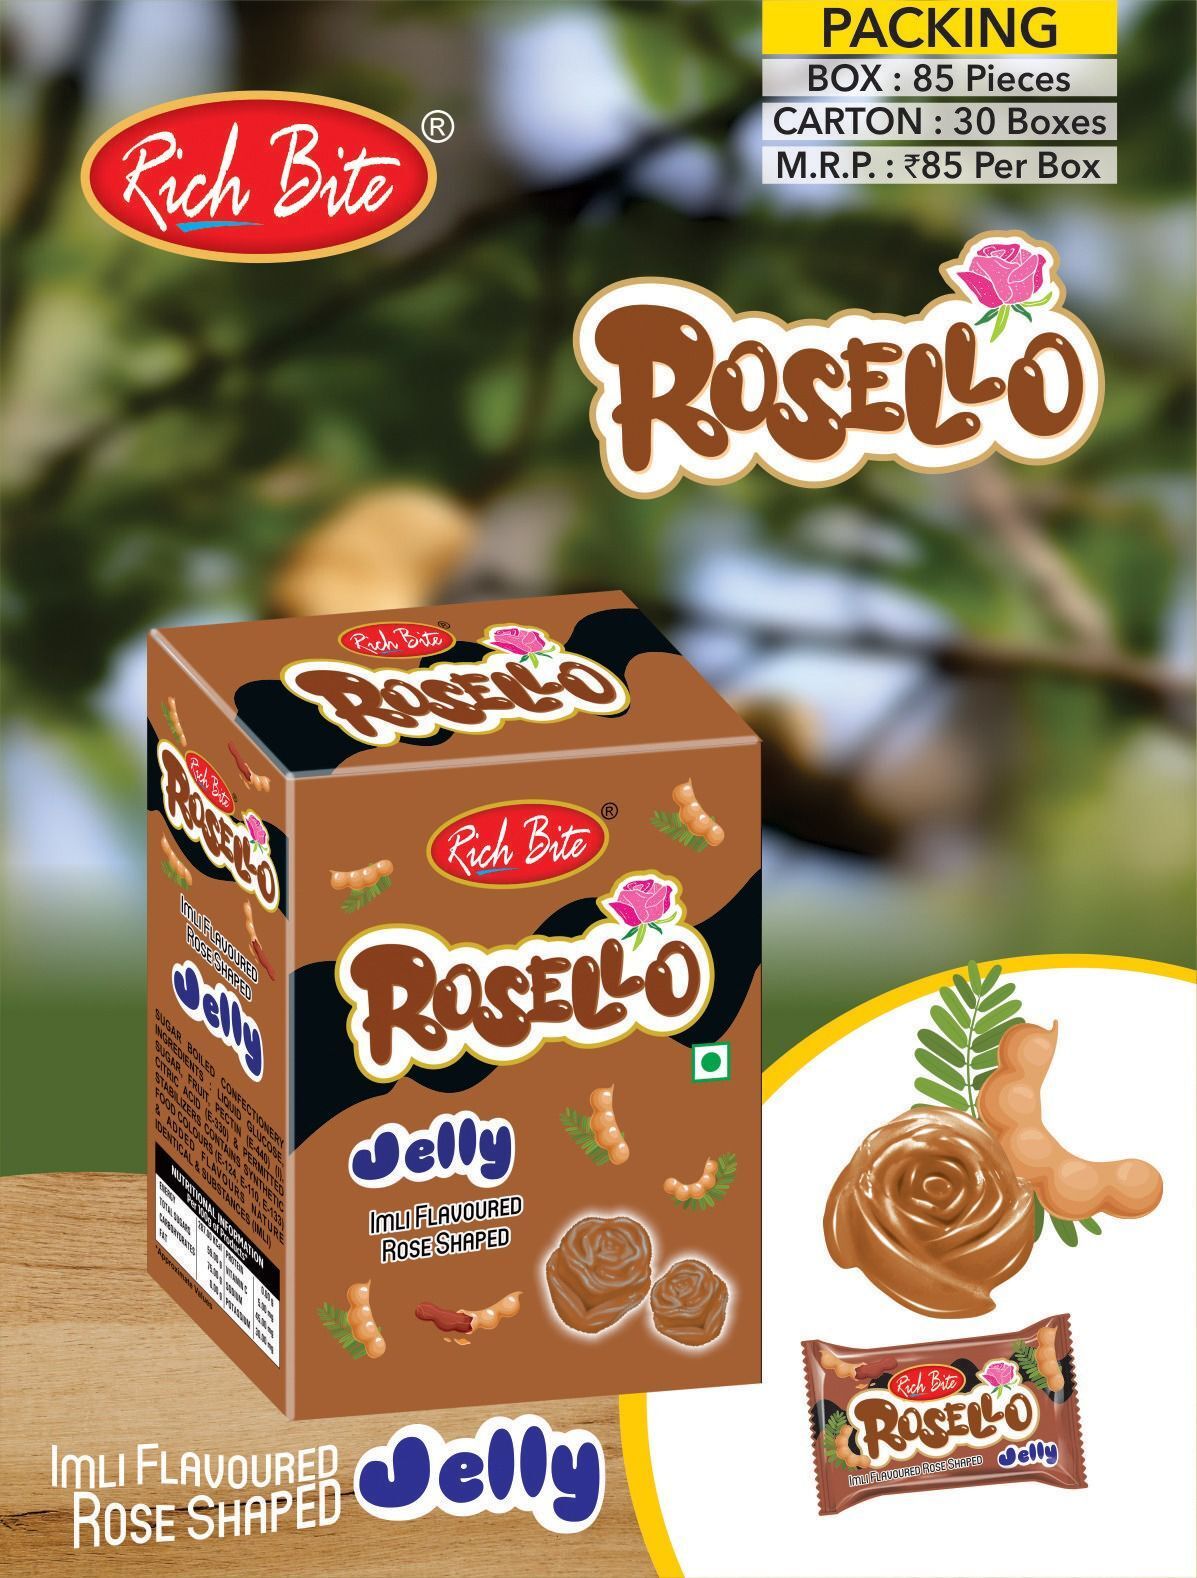 Rosello Strawberry Flavoured Rose Shaped Jelly